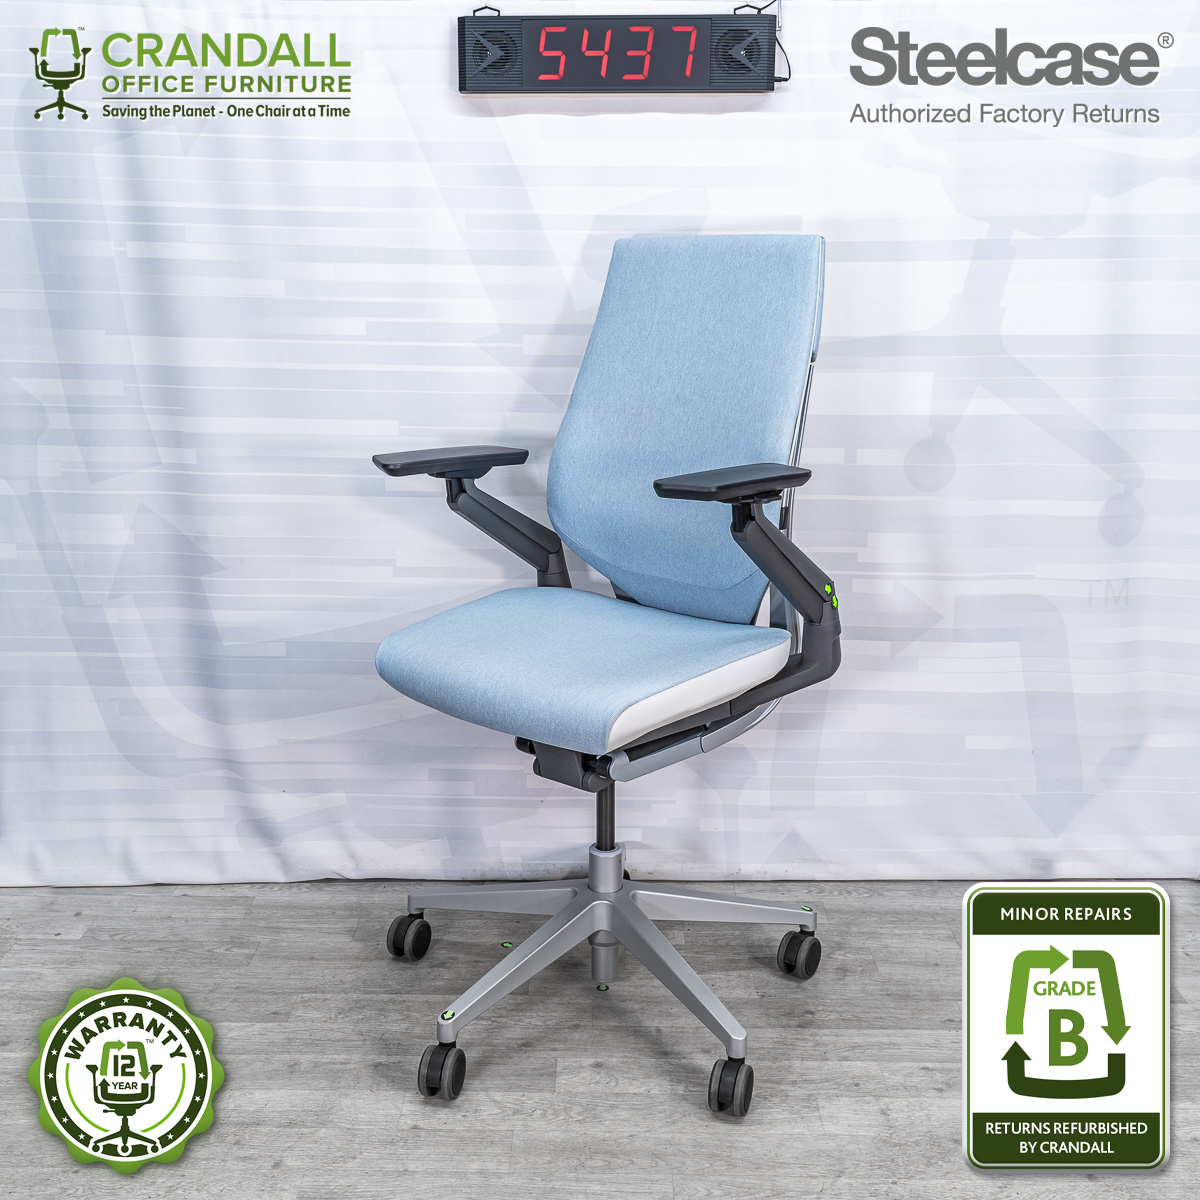 Remanufactured Steelcase 442 Gesture Office Chair - Shell Back - Crandall  Office Furniture